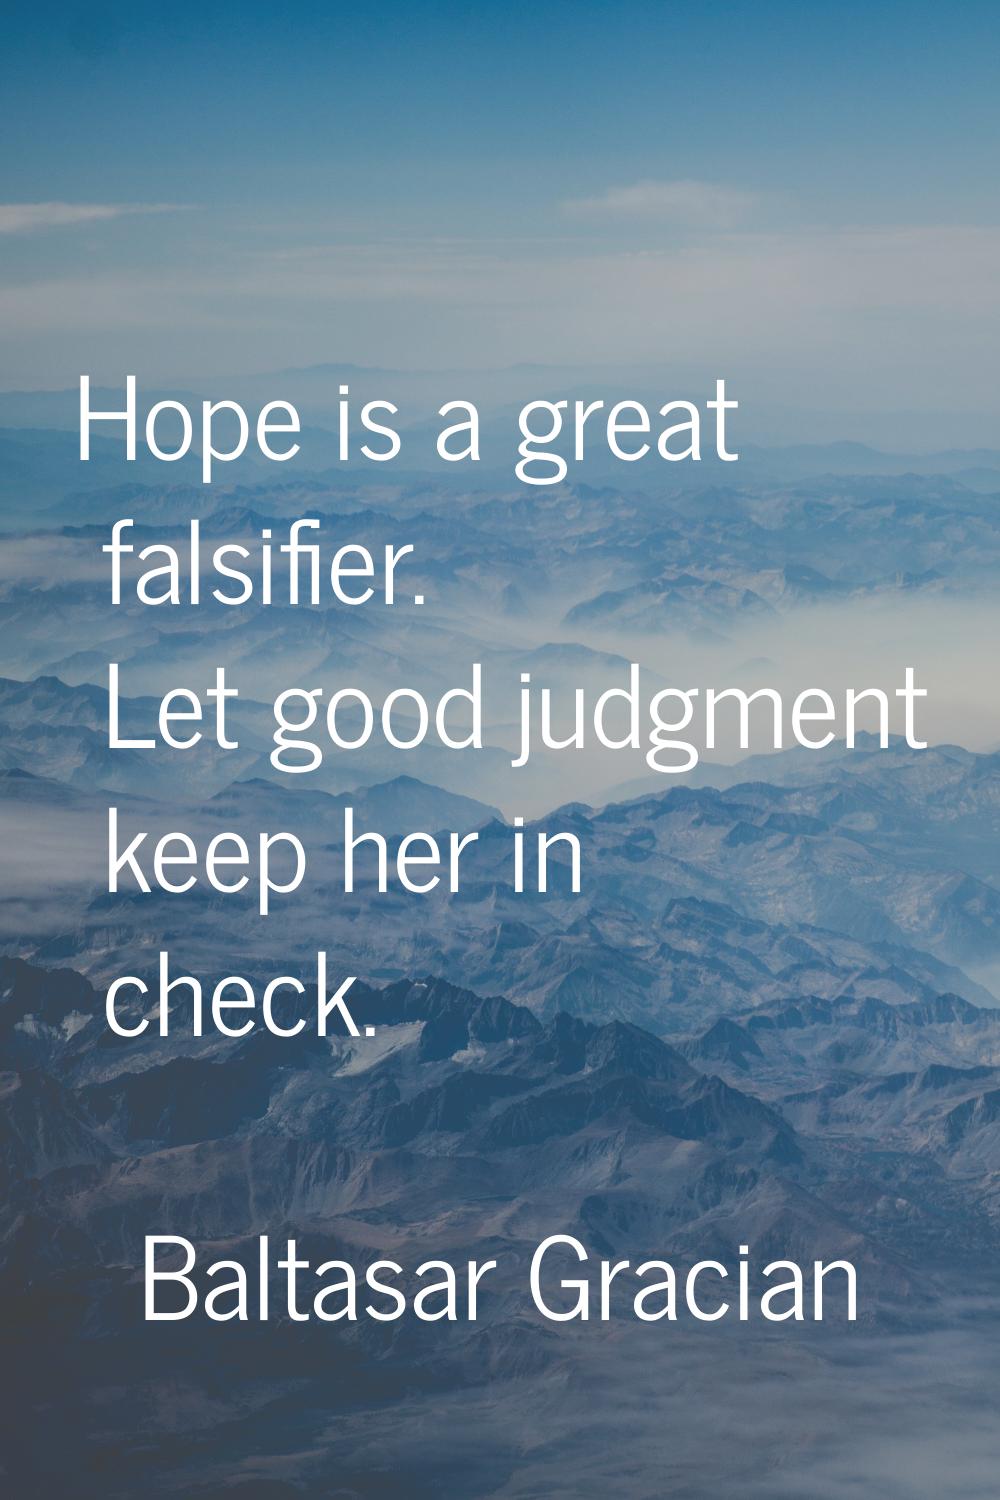 Hope is a great falsifier. Let good judgment keep her in check.